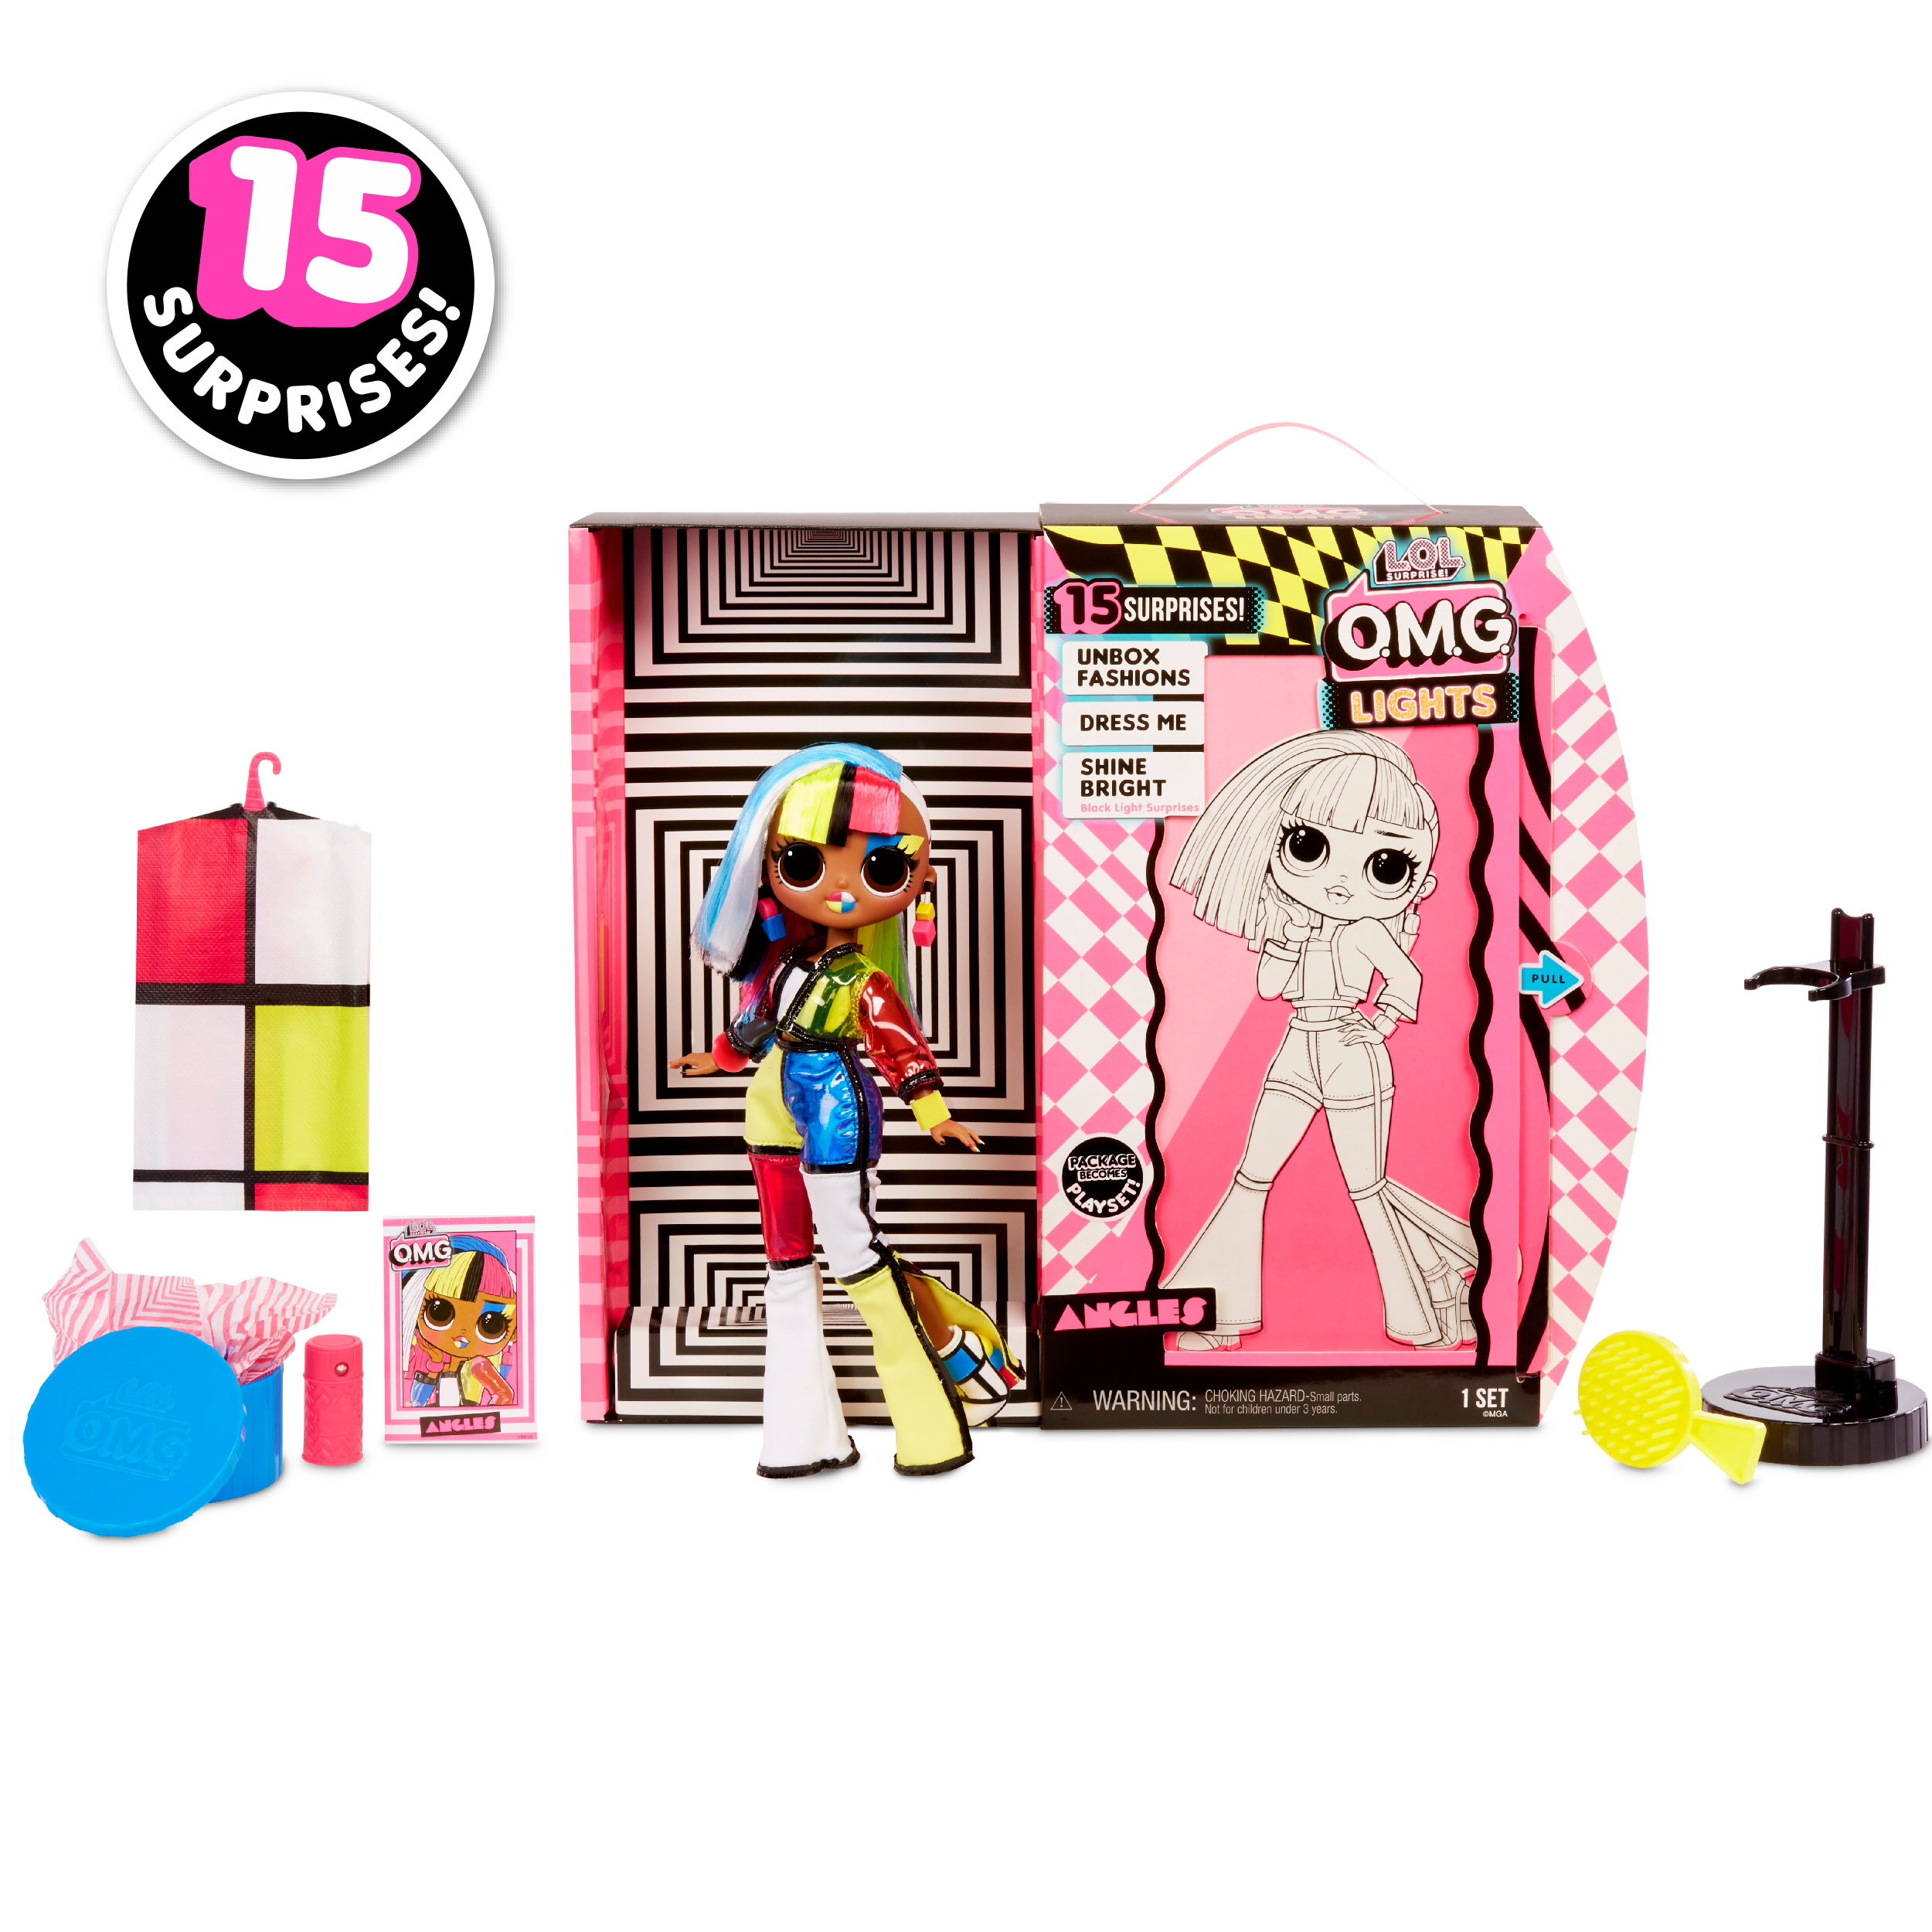 LOL Surprise OMG Lights Angles Fashion Doll With 15 Surprises, Great Gift for Kids Ages 4 5 6+ - image 3 of 7